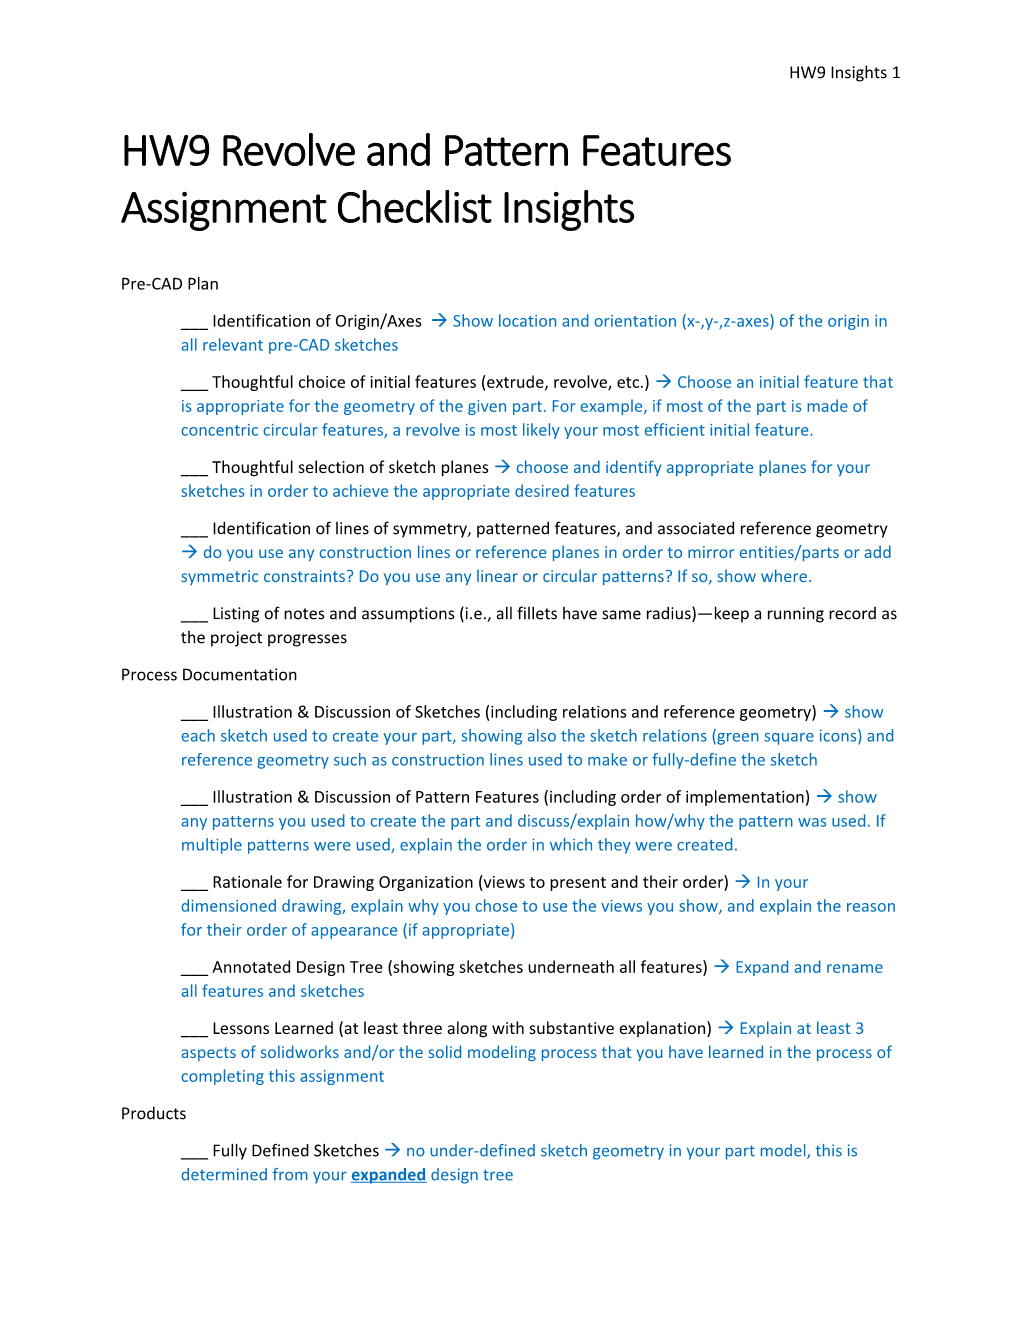 HW9 Revolve and Pattern Features Assignment Checklist Insights